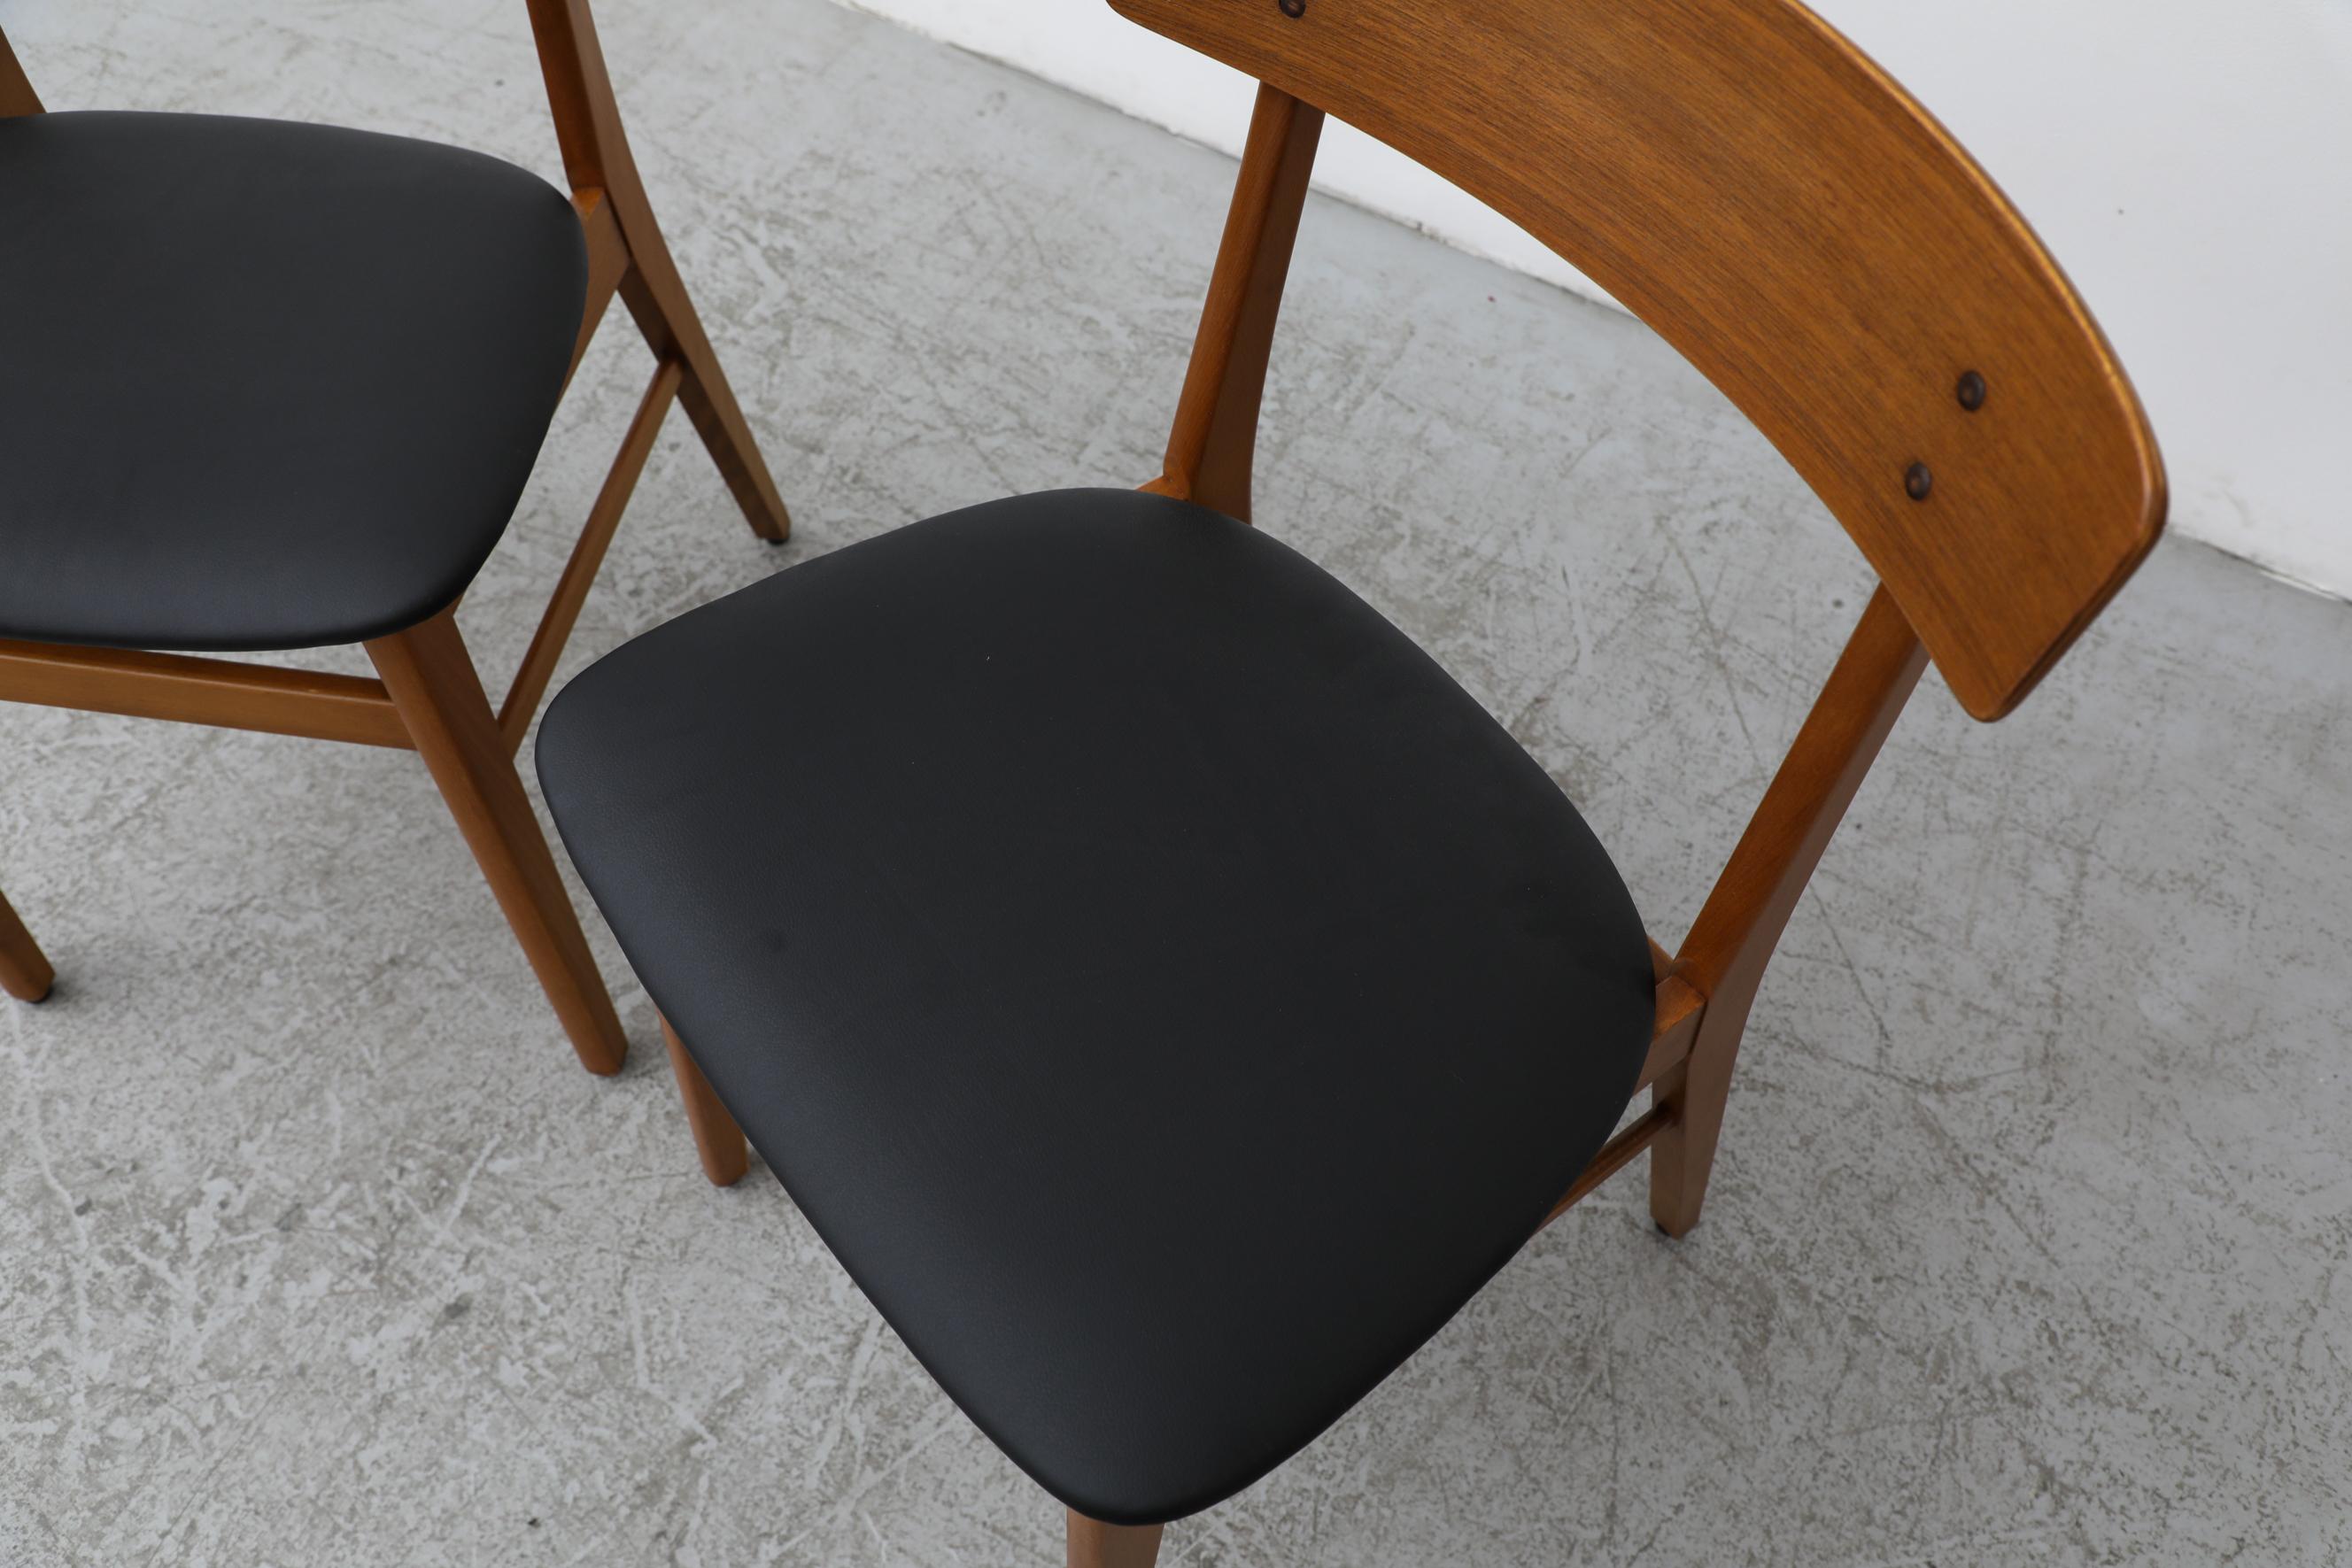 Pair of Borge Mogensen Style Danish Chairs by Farstrup with Black Skai Seats For Sale 5